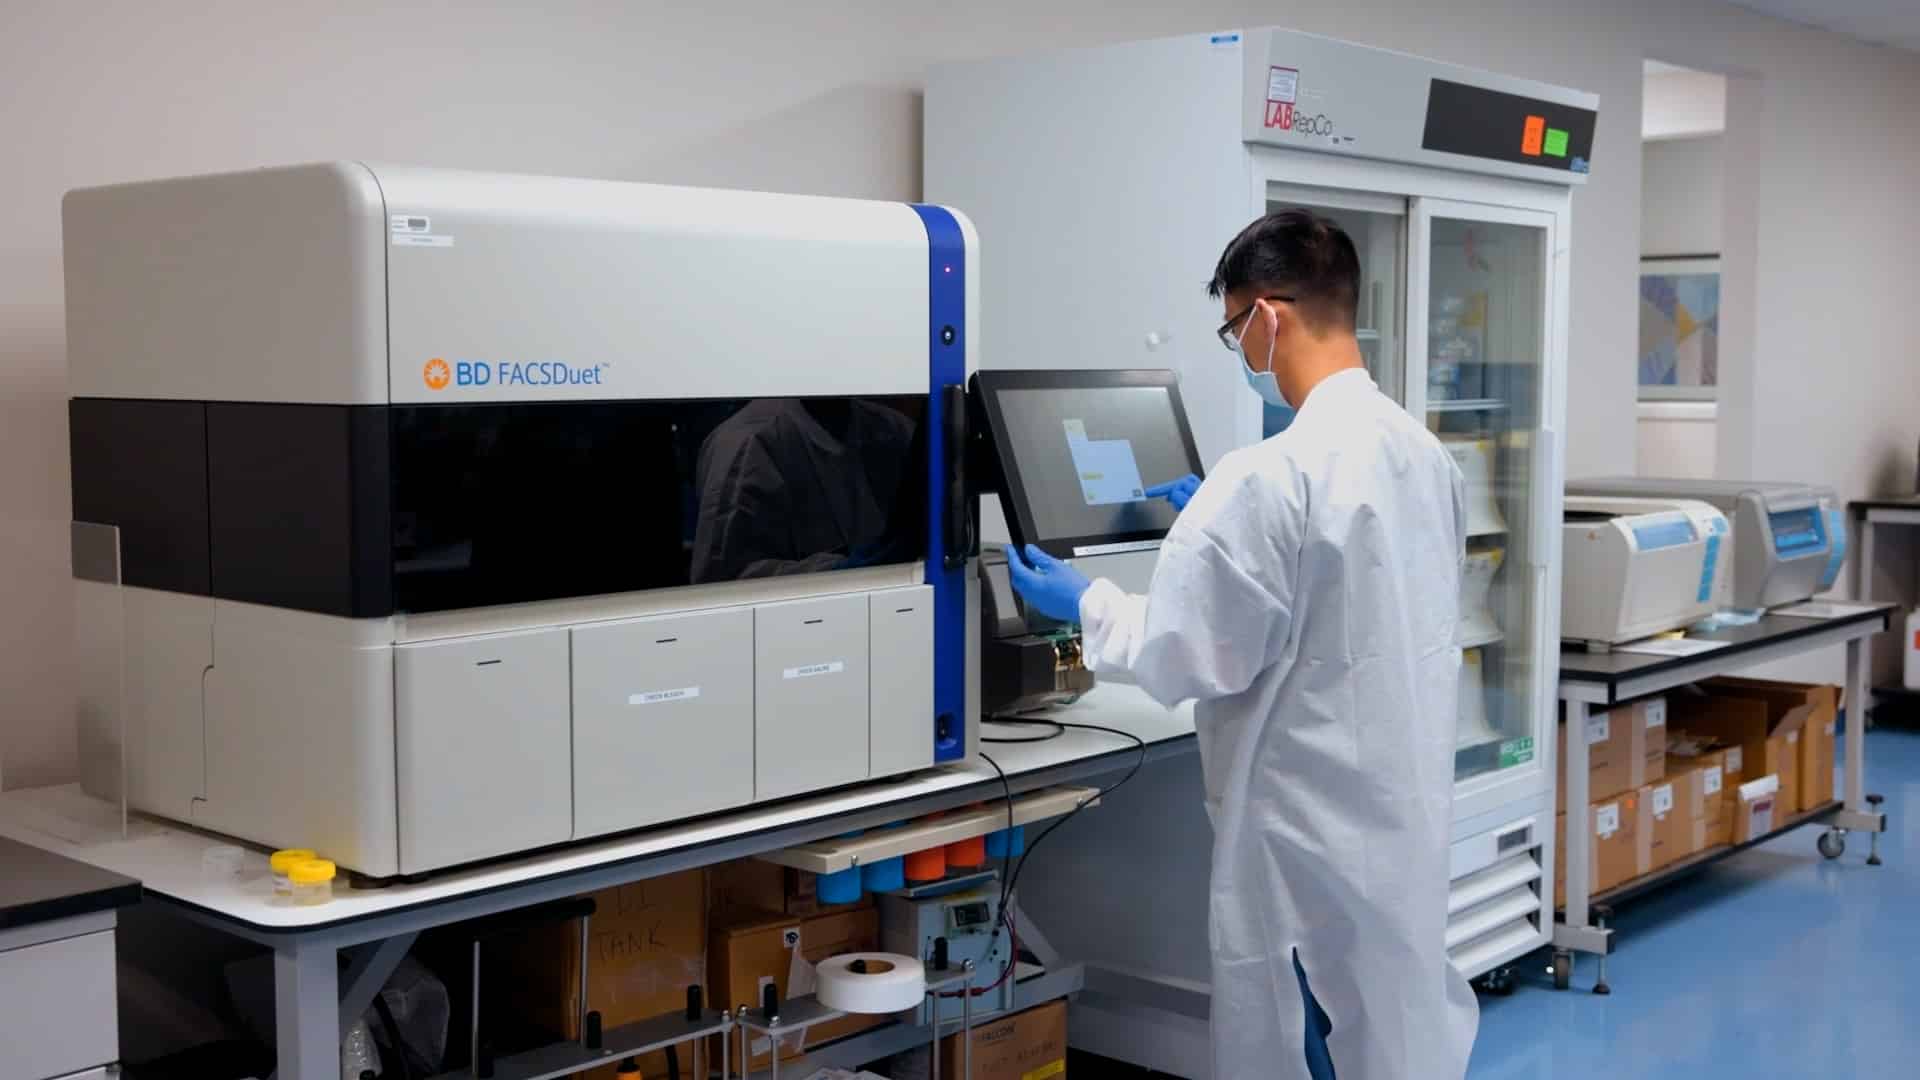 a scientist in a lab operating a BD FACASDuet sample preparation system